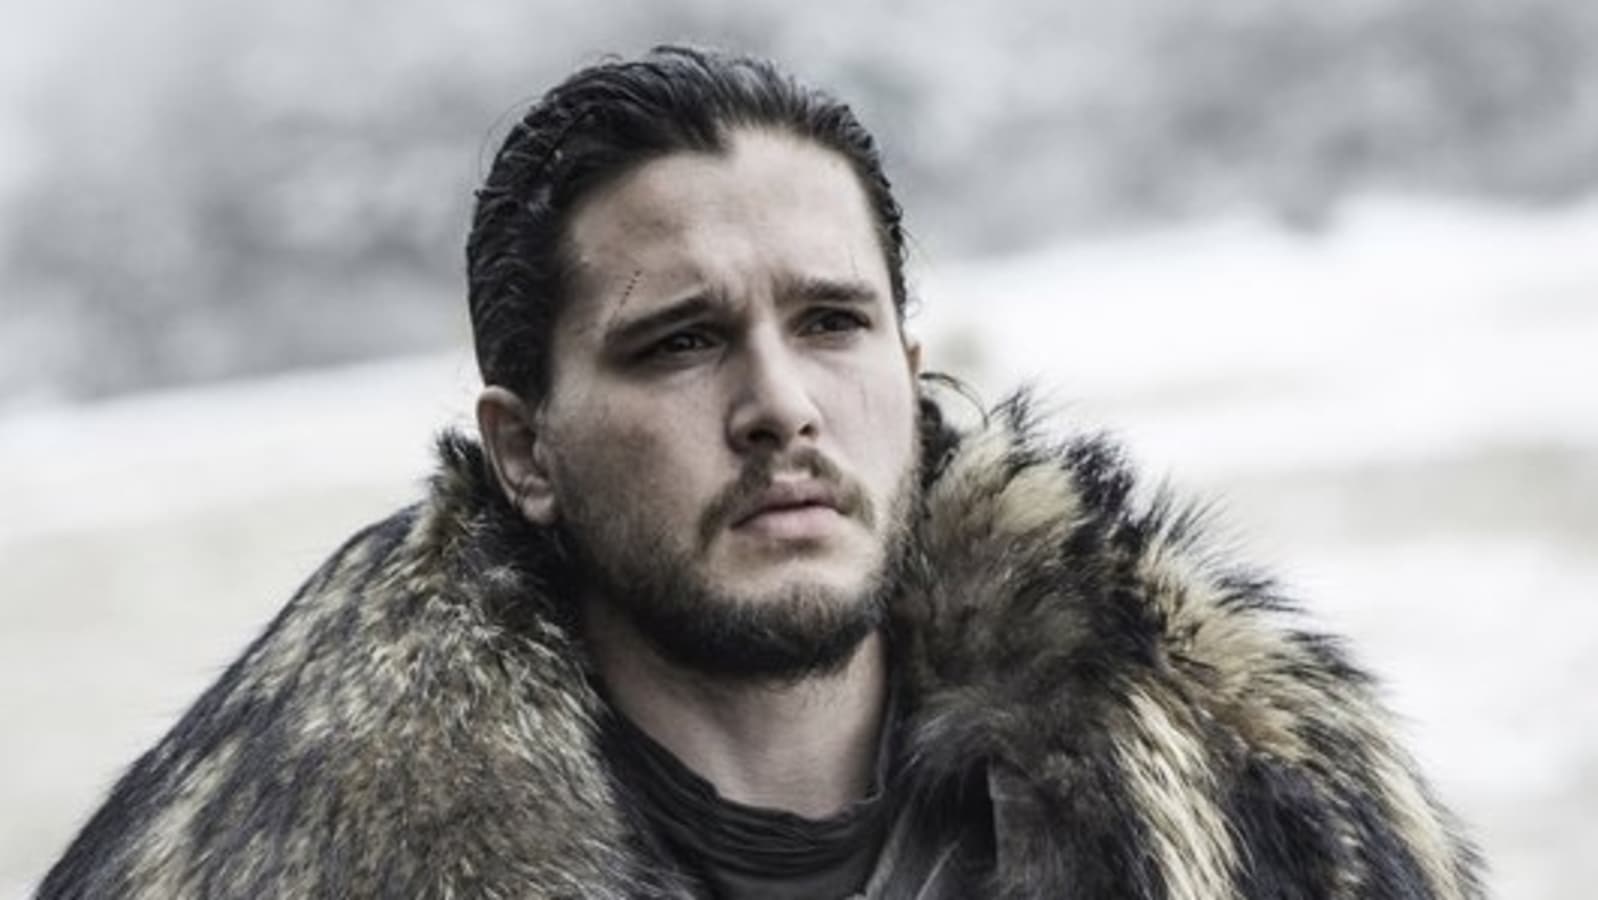 Game of Thrones spin-off series to bring back Kit Harington as Jon Snow, fans say ‘winter is coming, again’